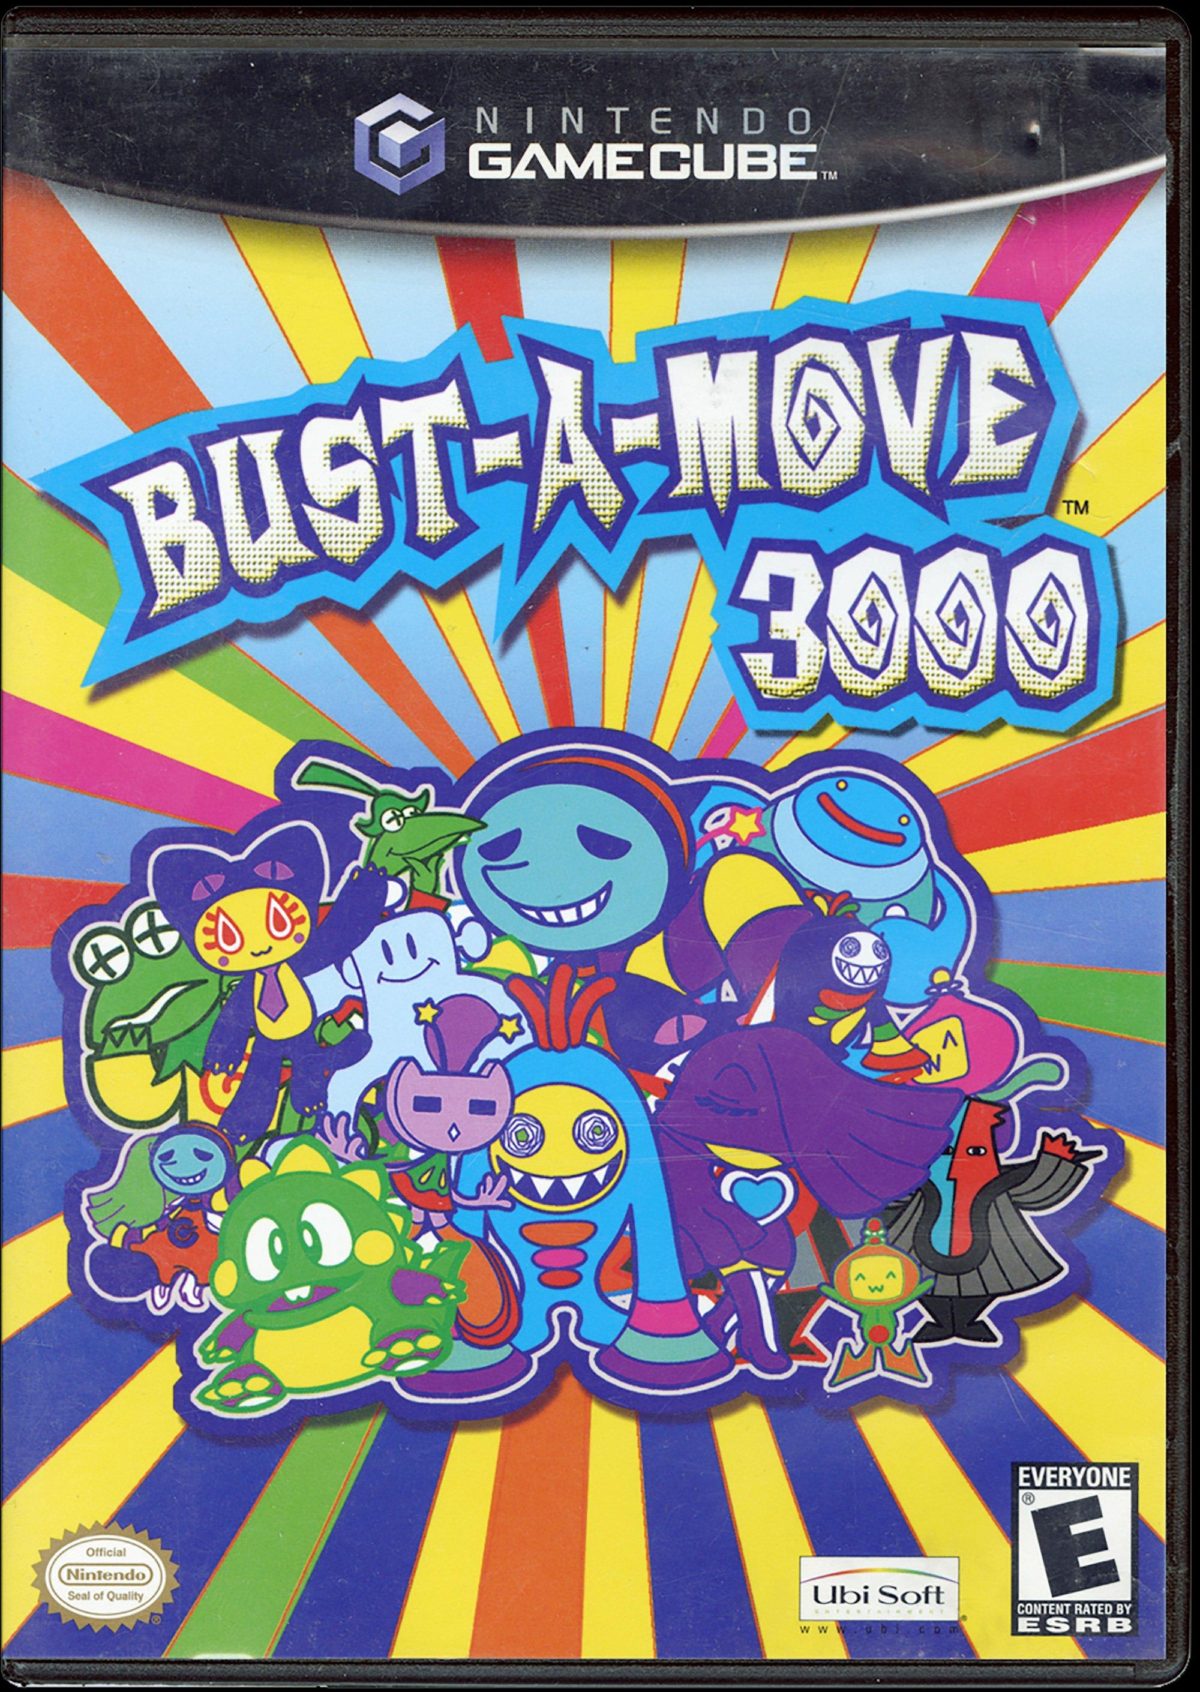 Bust-a-Move 3000 player count stats